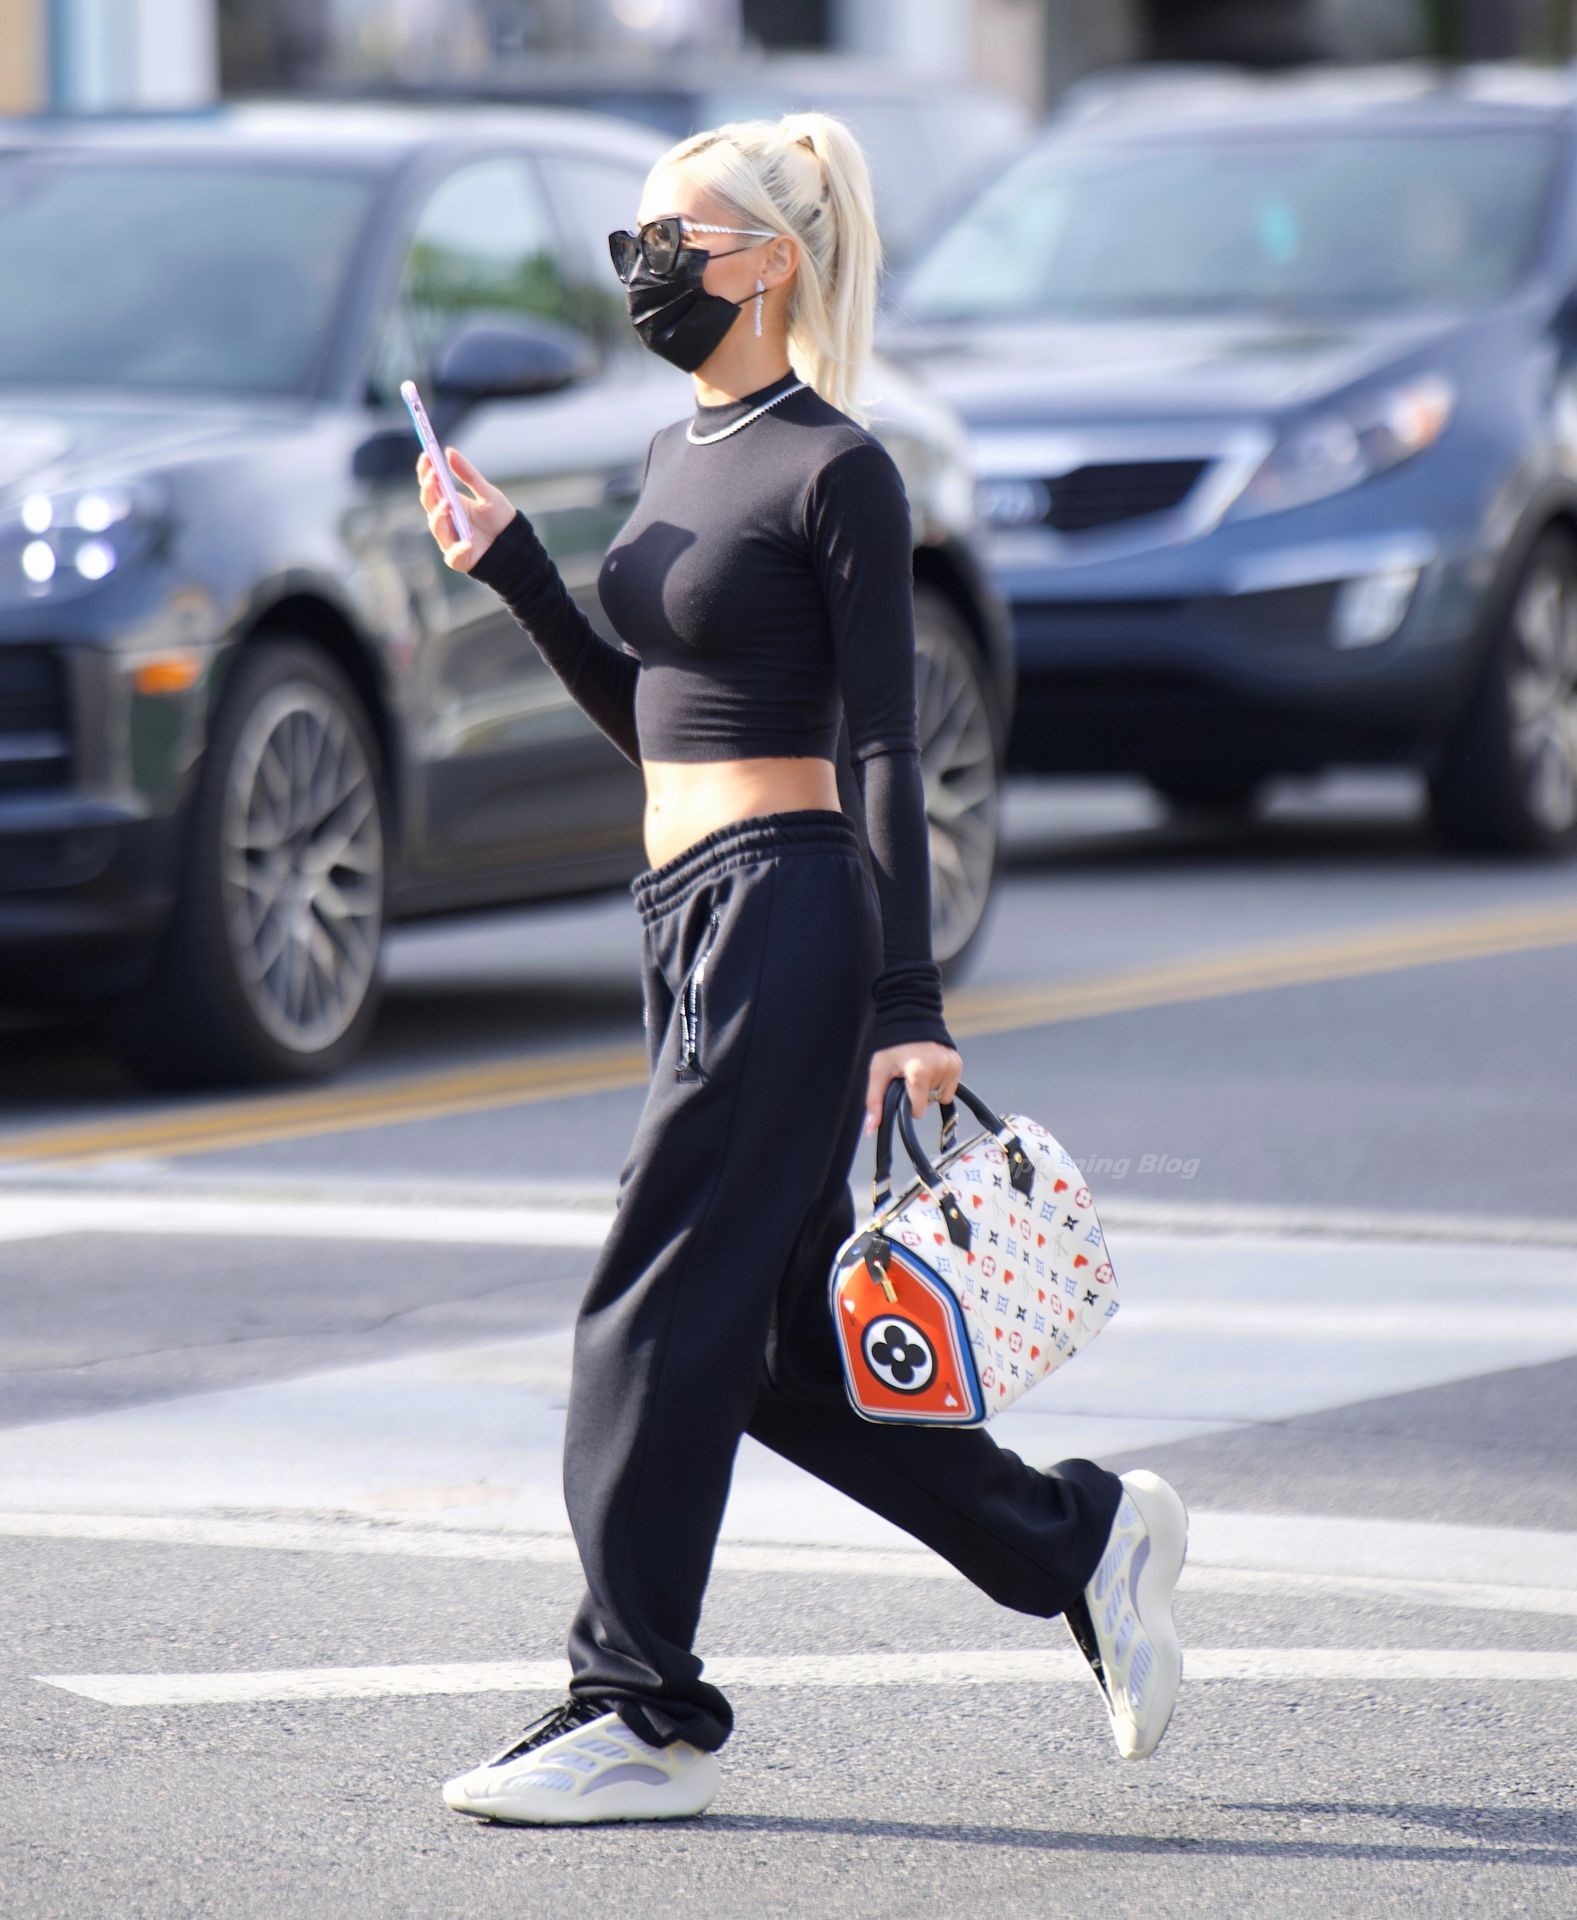 Pia Mia Displays Her Abs and Pokies in New York (20 Photos)